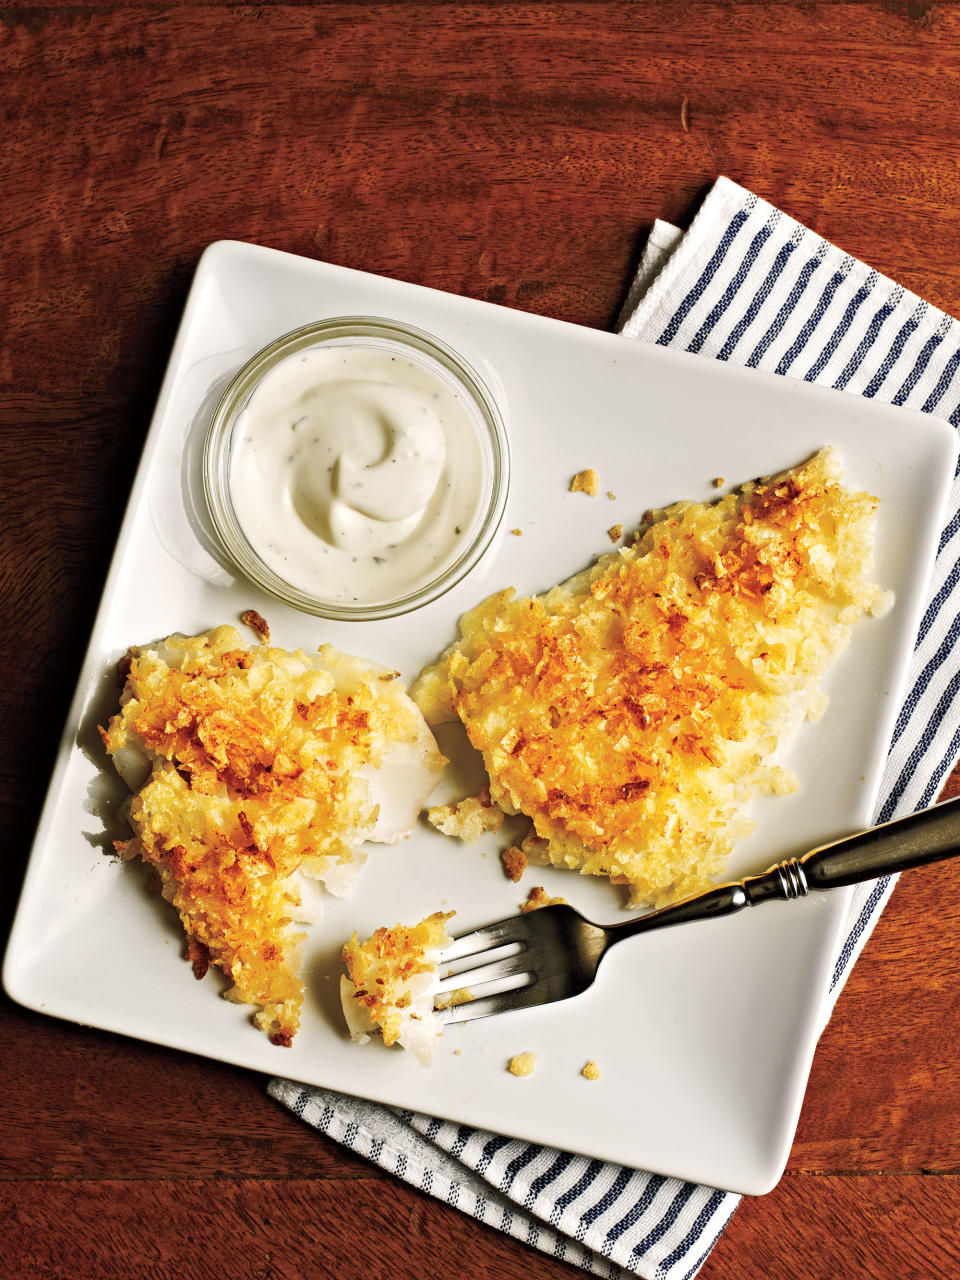 Chip-Crusted Fish Fillets